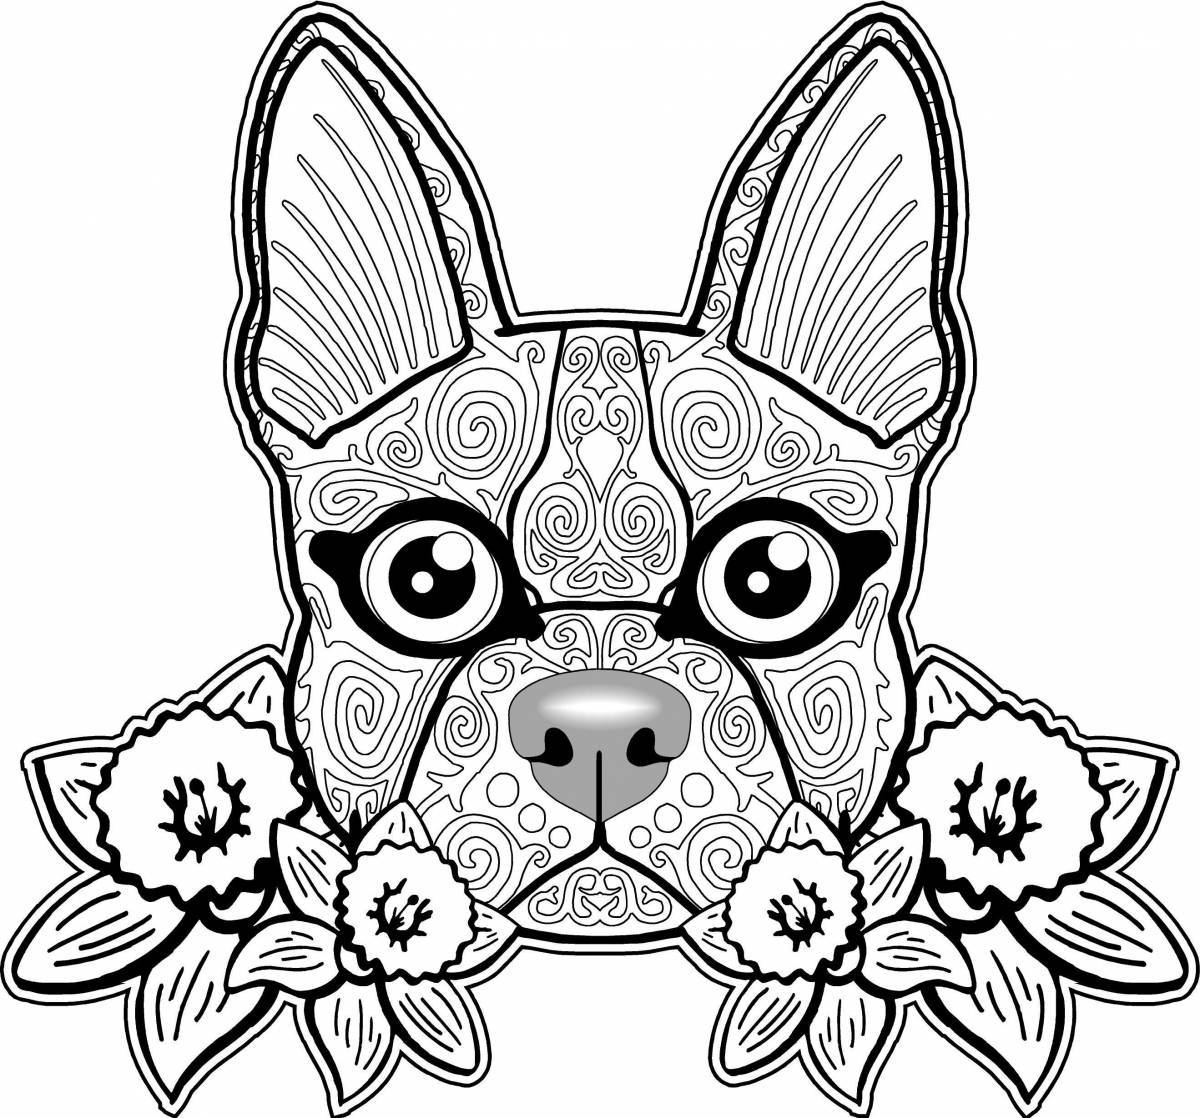 Playtime dog and cat coloring page